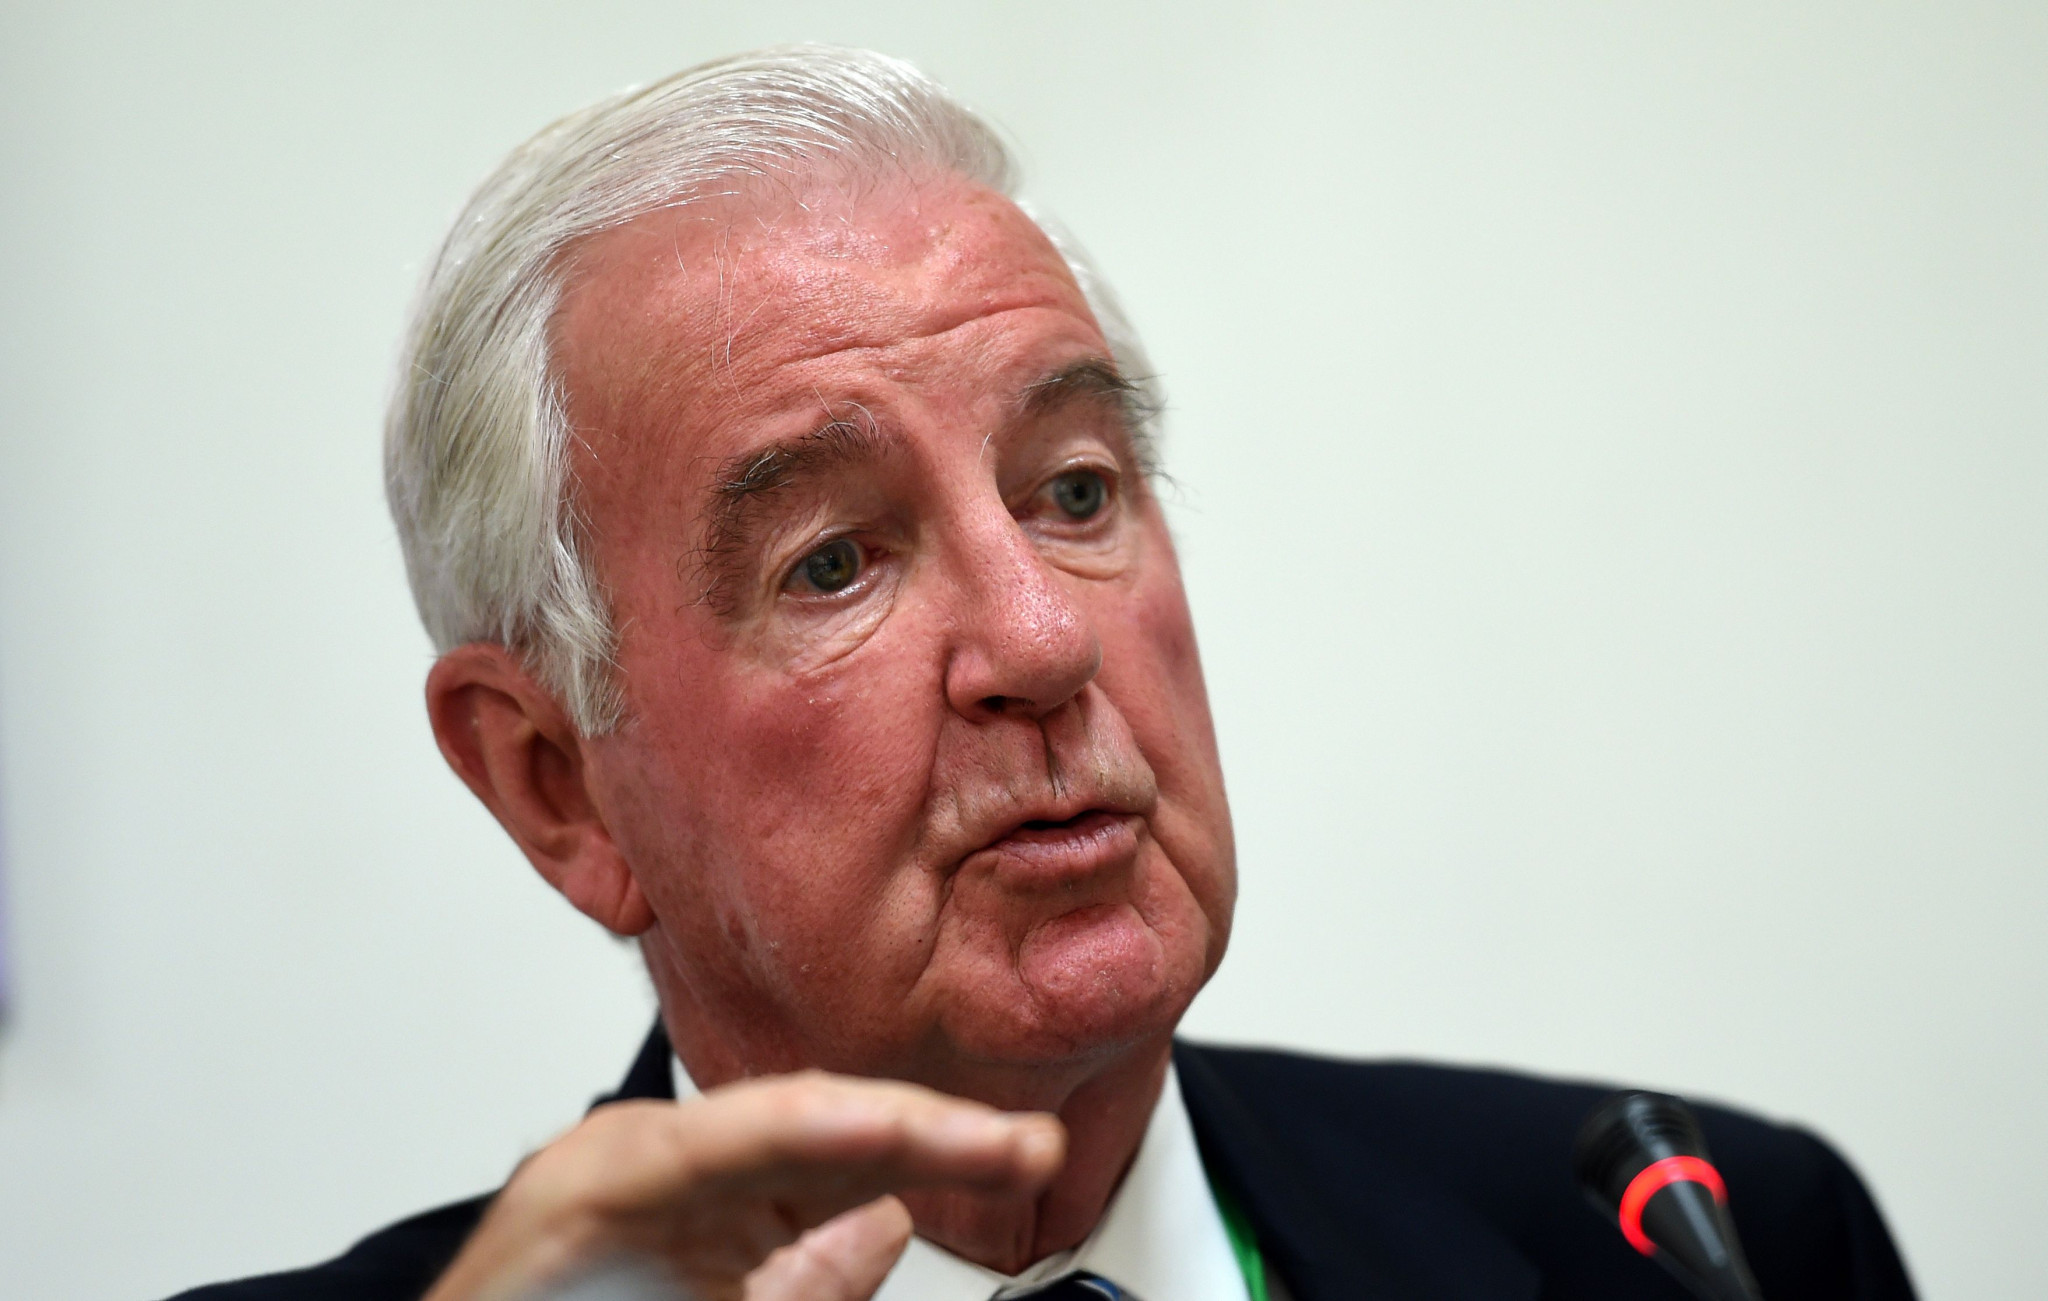 WADA President Sir Craig Reedie will give a keynote address at the symposium ©Getty Images